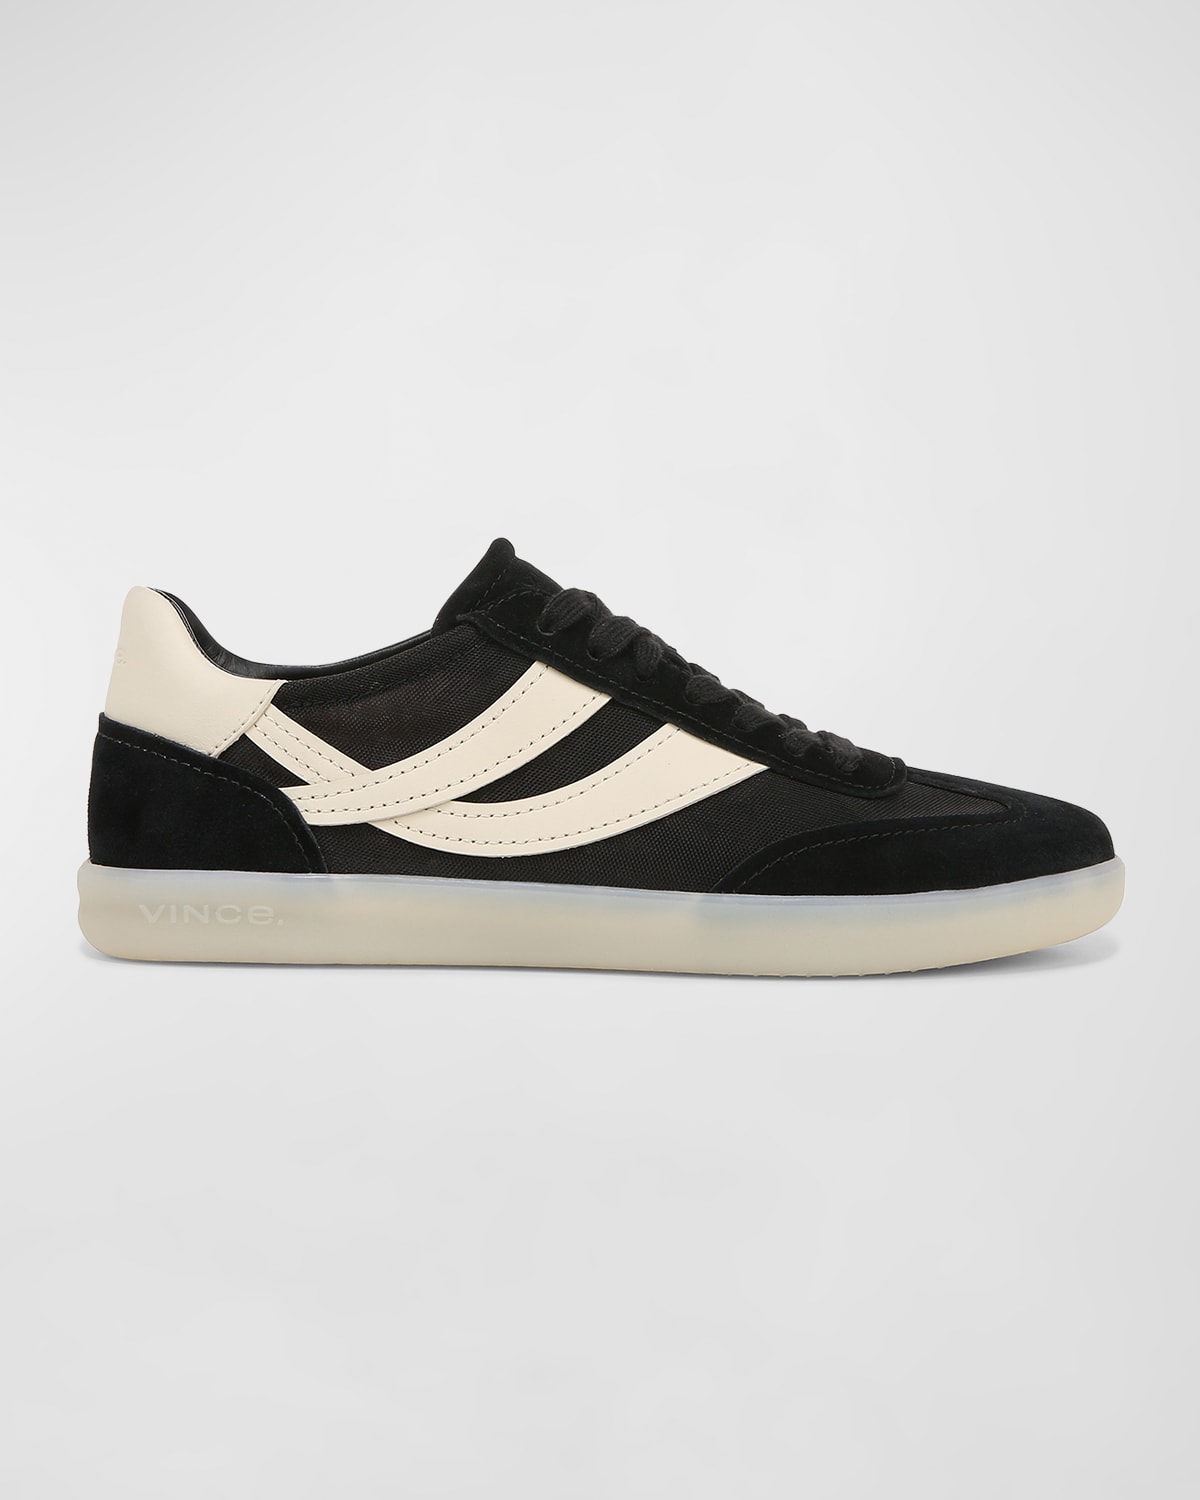 Vince Oasis Mixed Leather Retro Trainers In Black Suede